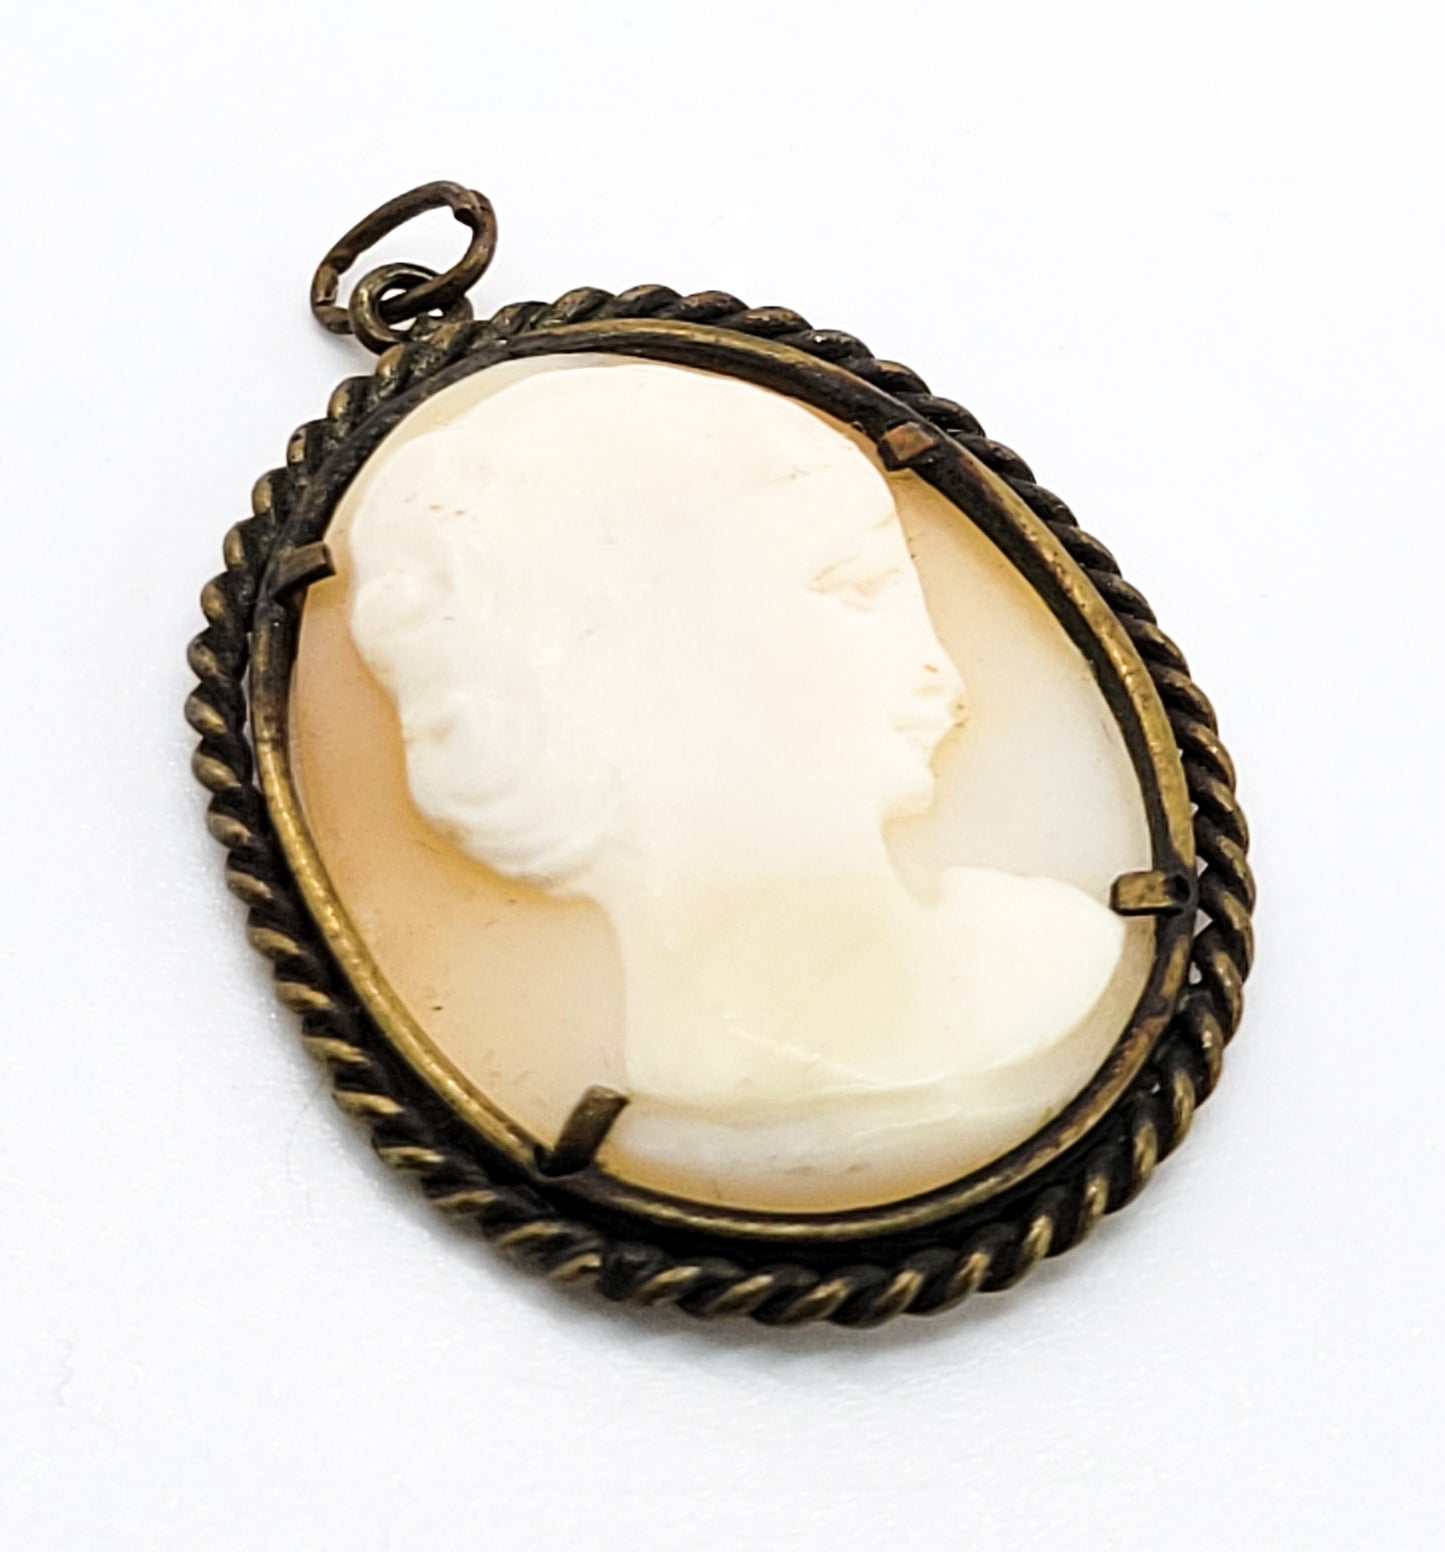 Carved shell right facing vintage woman cameo pendant in twisted rope brass setting